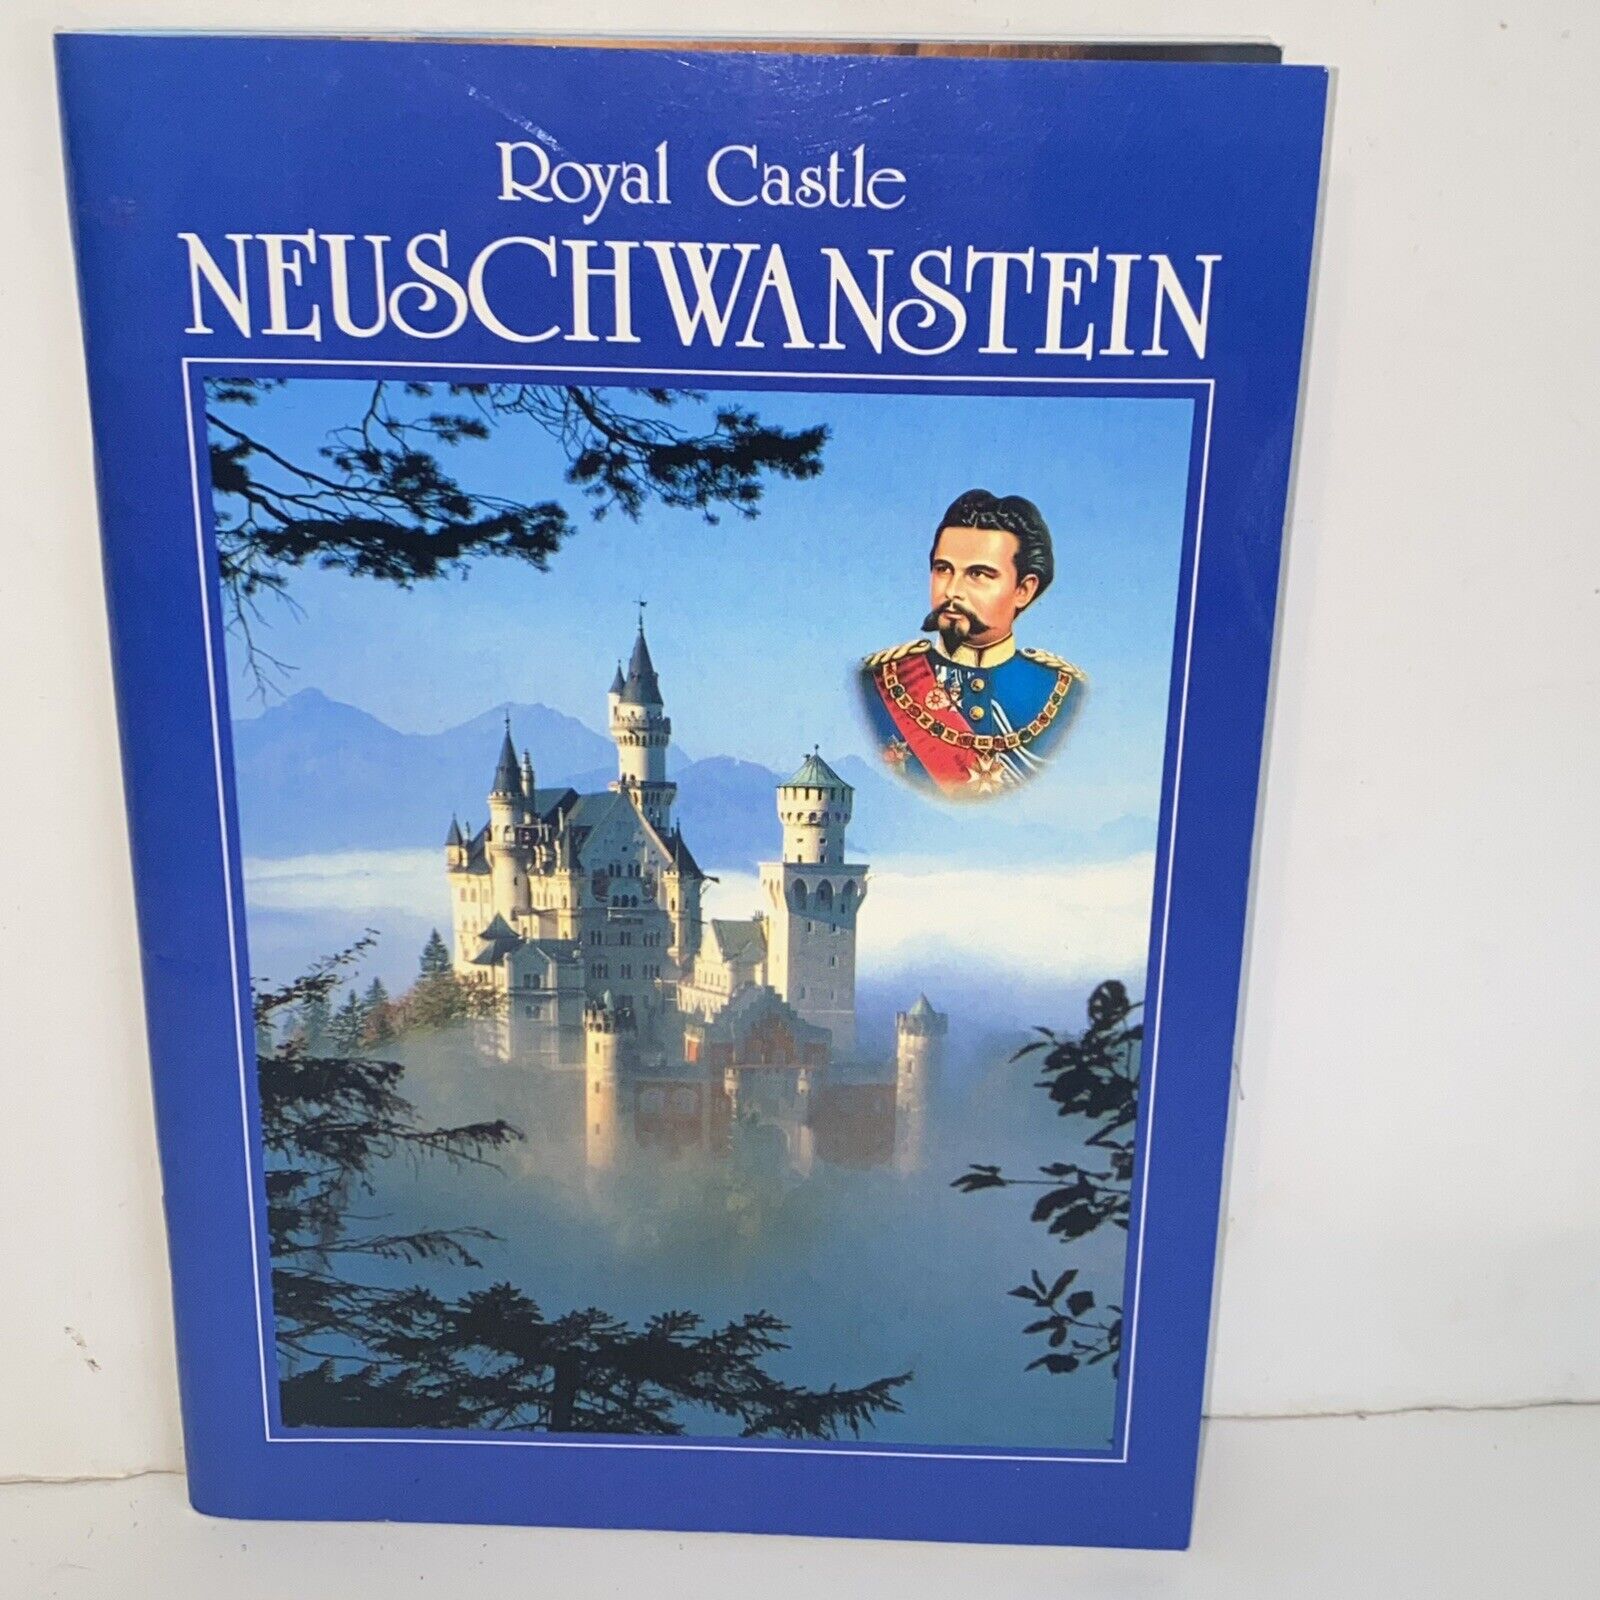 Vintage 1992 Royal Castle Neuschwanstein Germany Vacation Travel Book Full Color